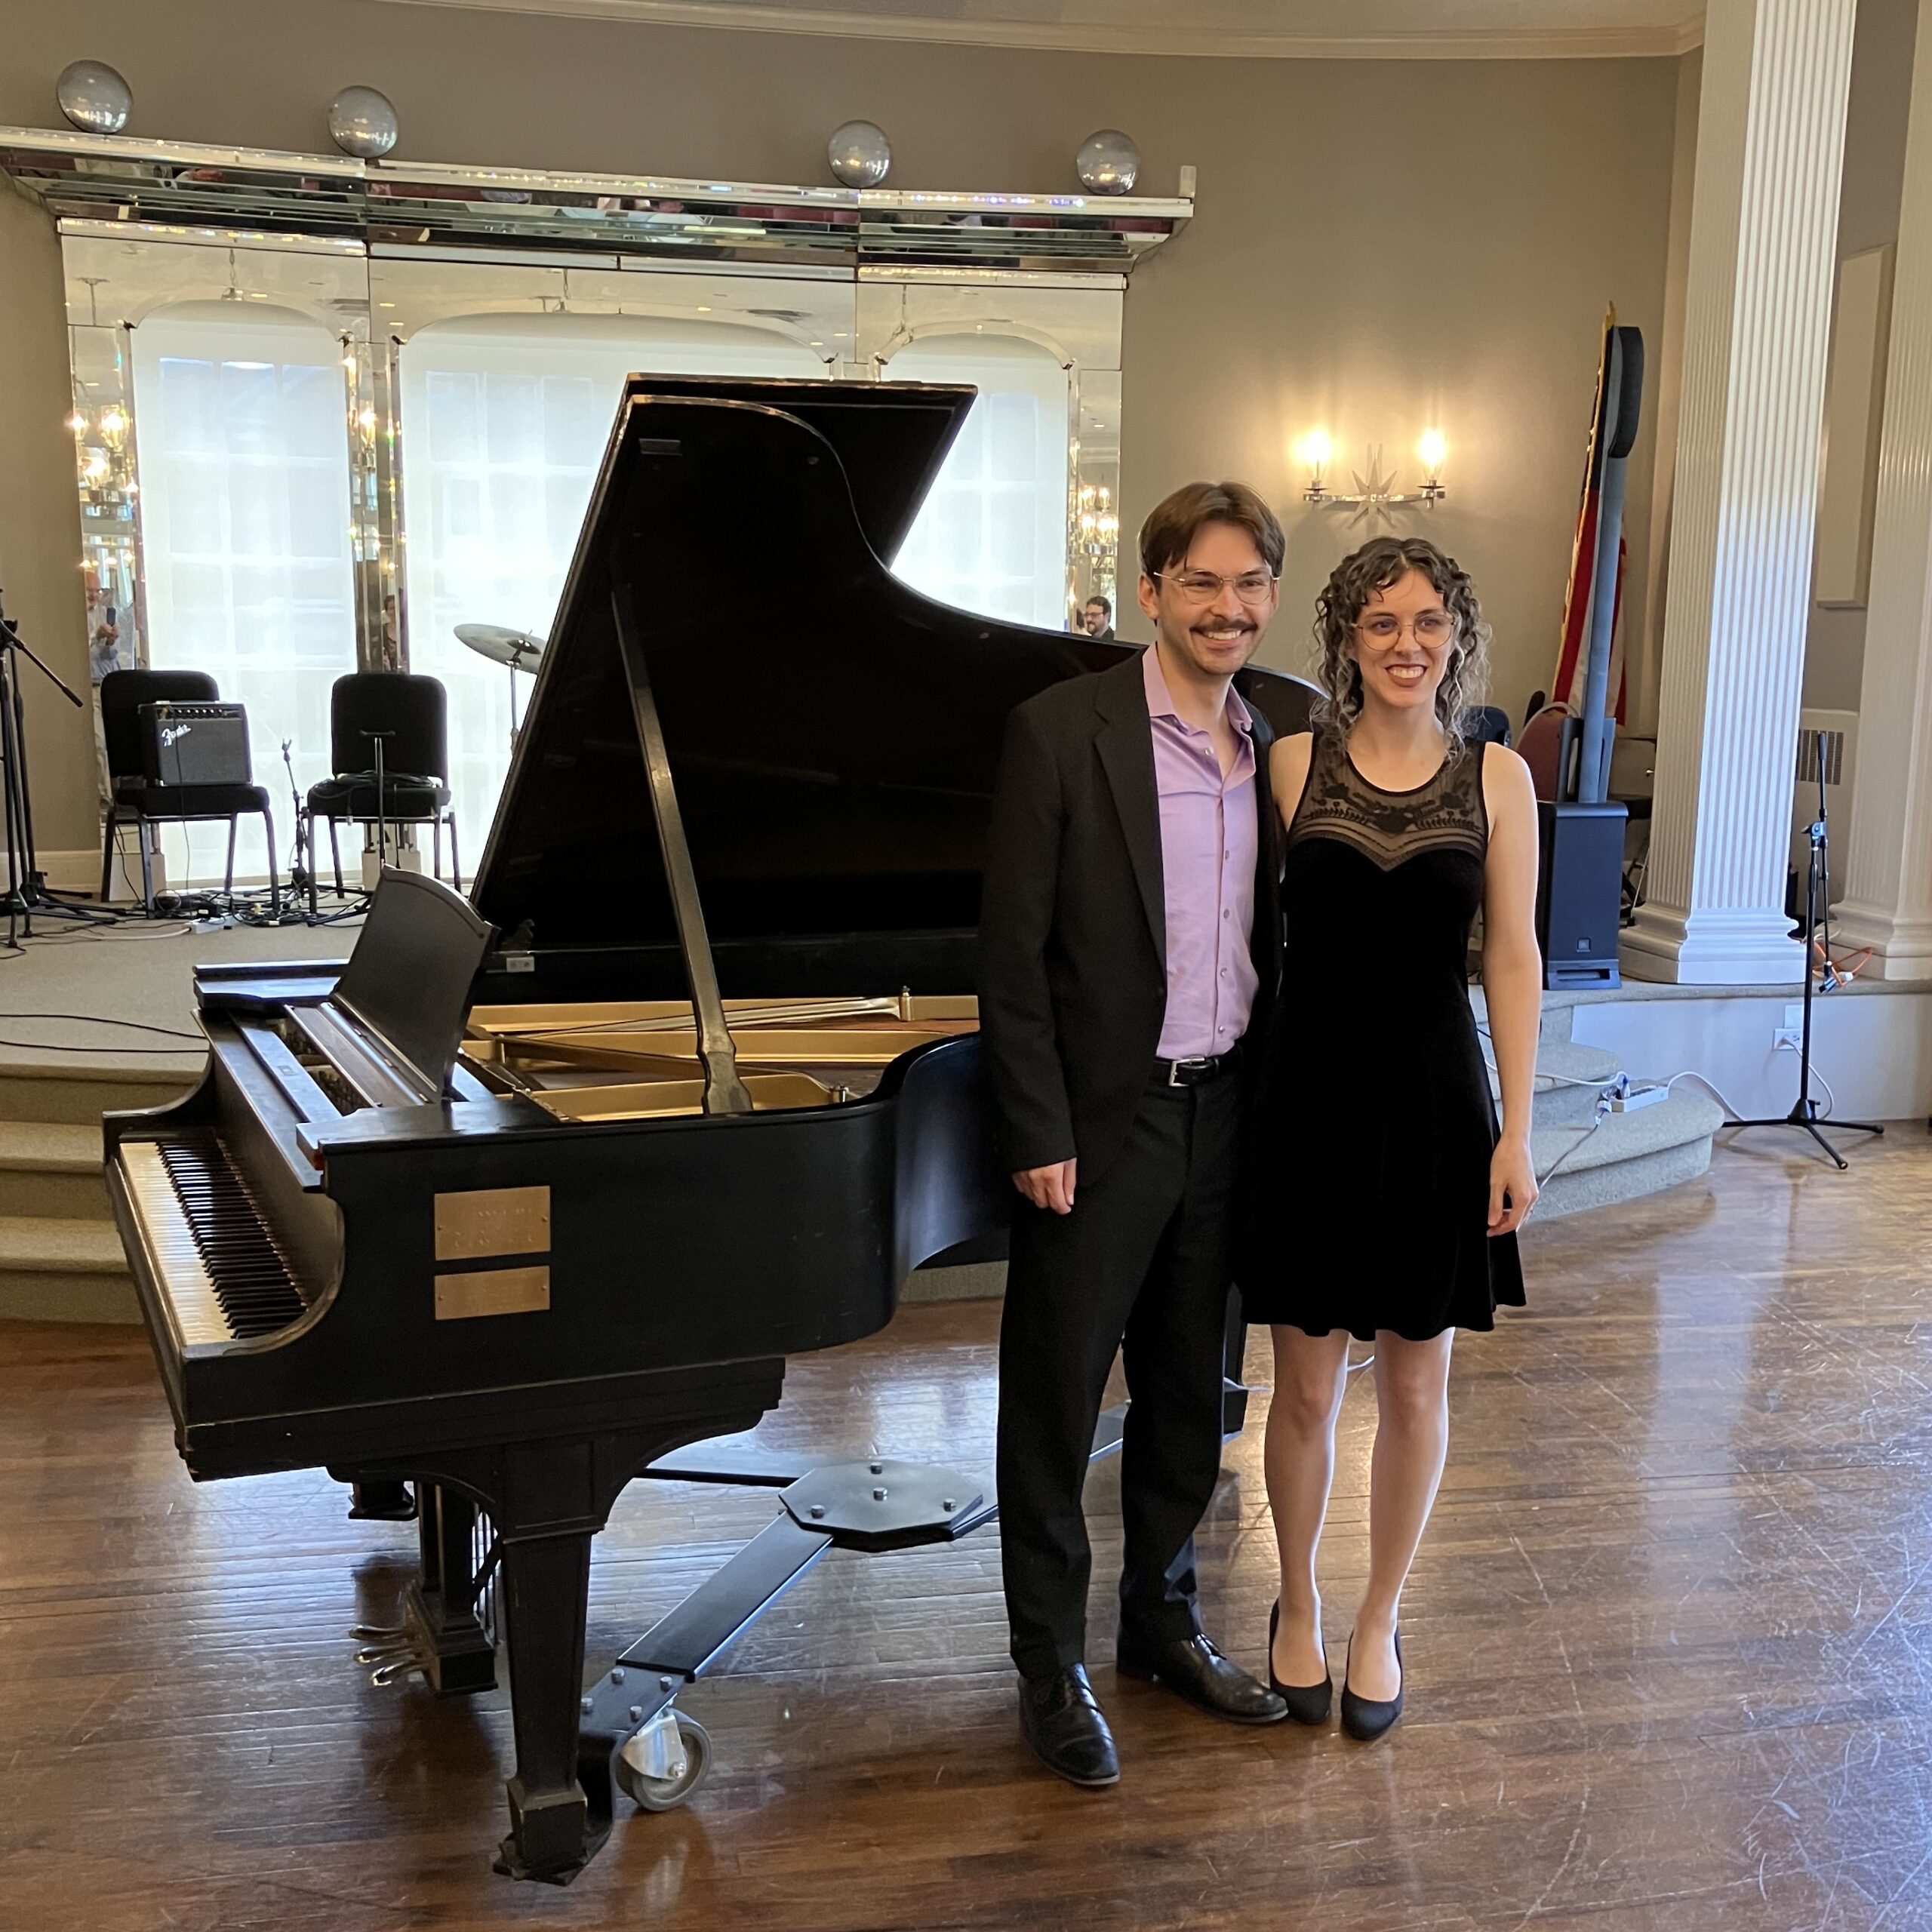 Evan William Nelson and Stephanie Baird presented "Reflections of the Renaissance"